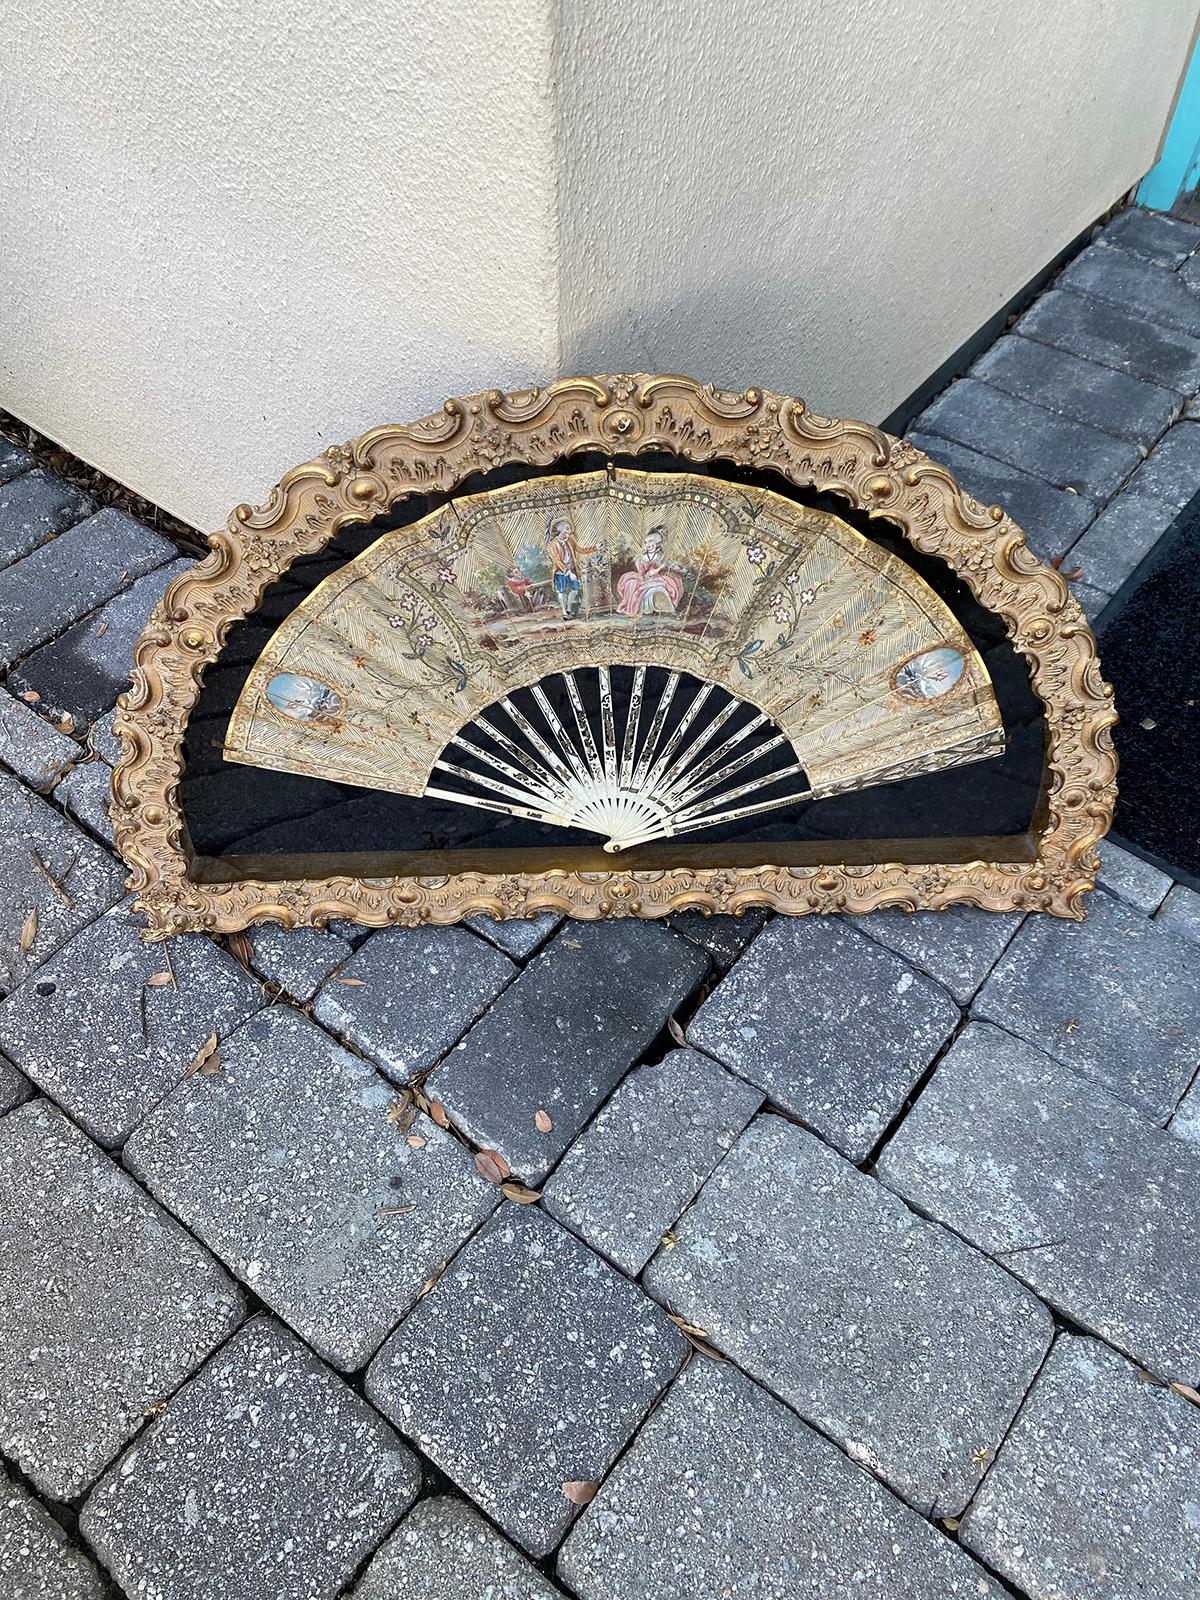 Early 18th century French fan in gilt display case.